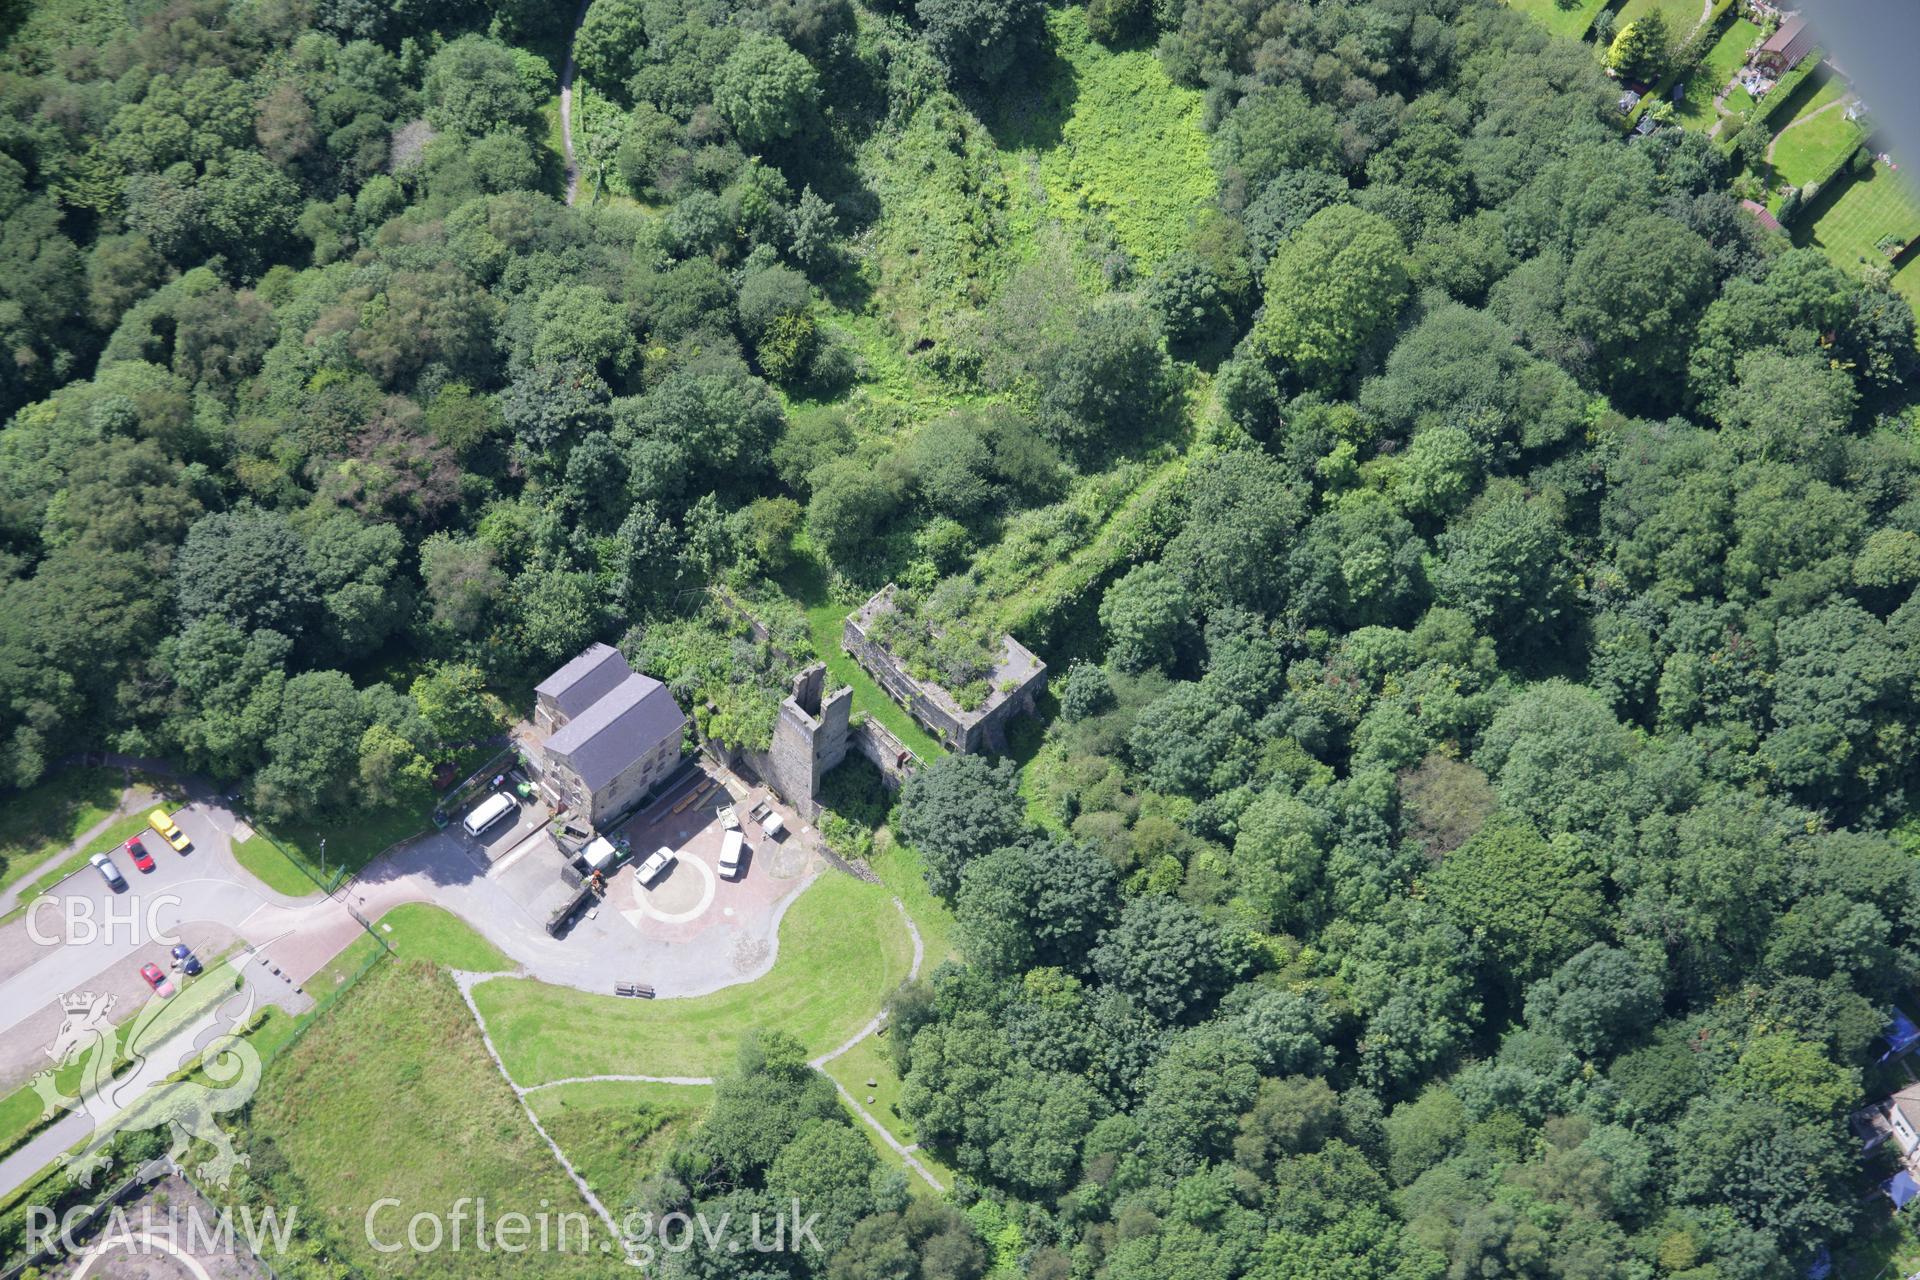 RCAHMW colour oblique aerial photograph of Tondu Ironworks. Taken on 30 July 2007 by Toby Driver